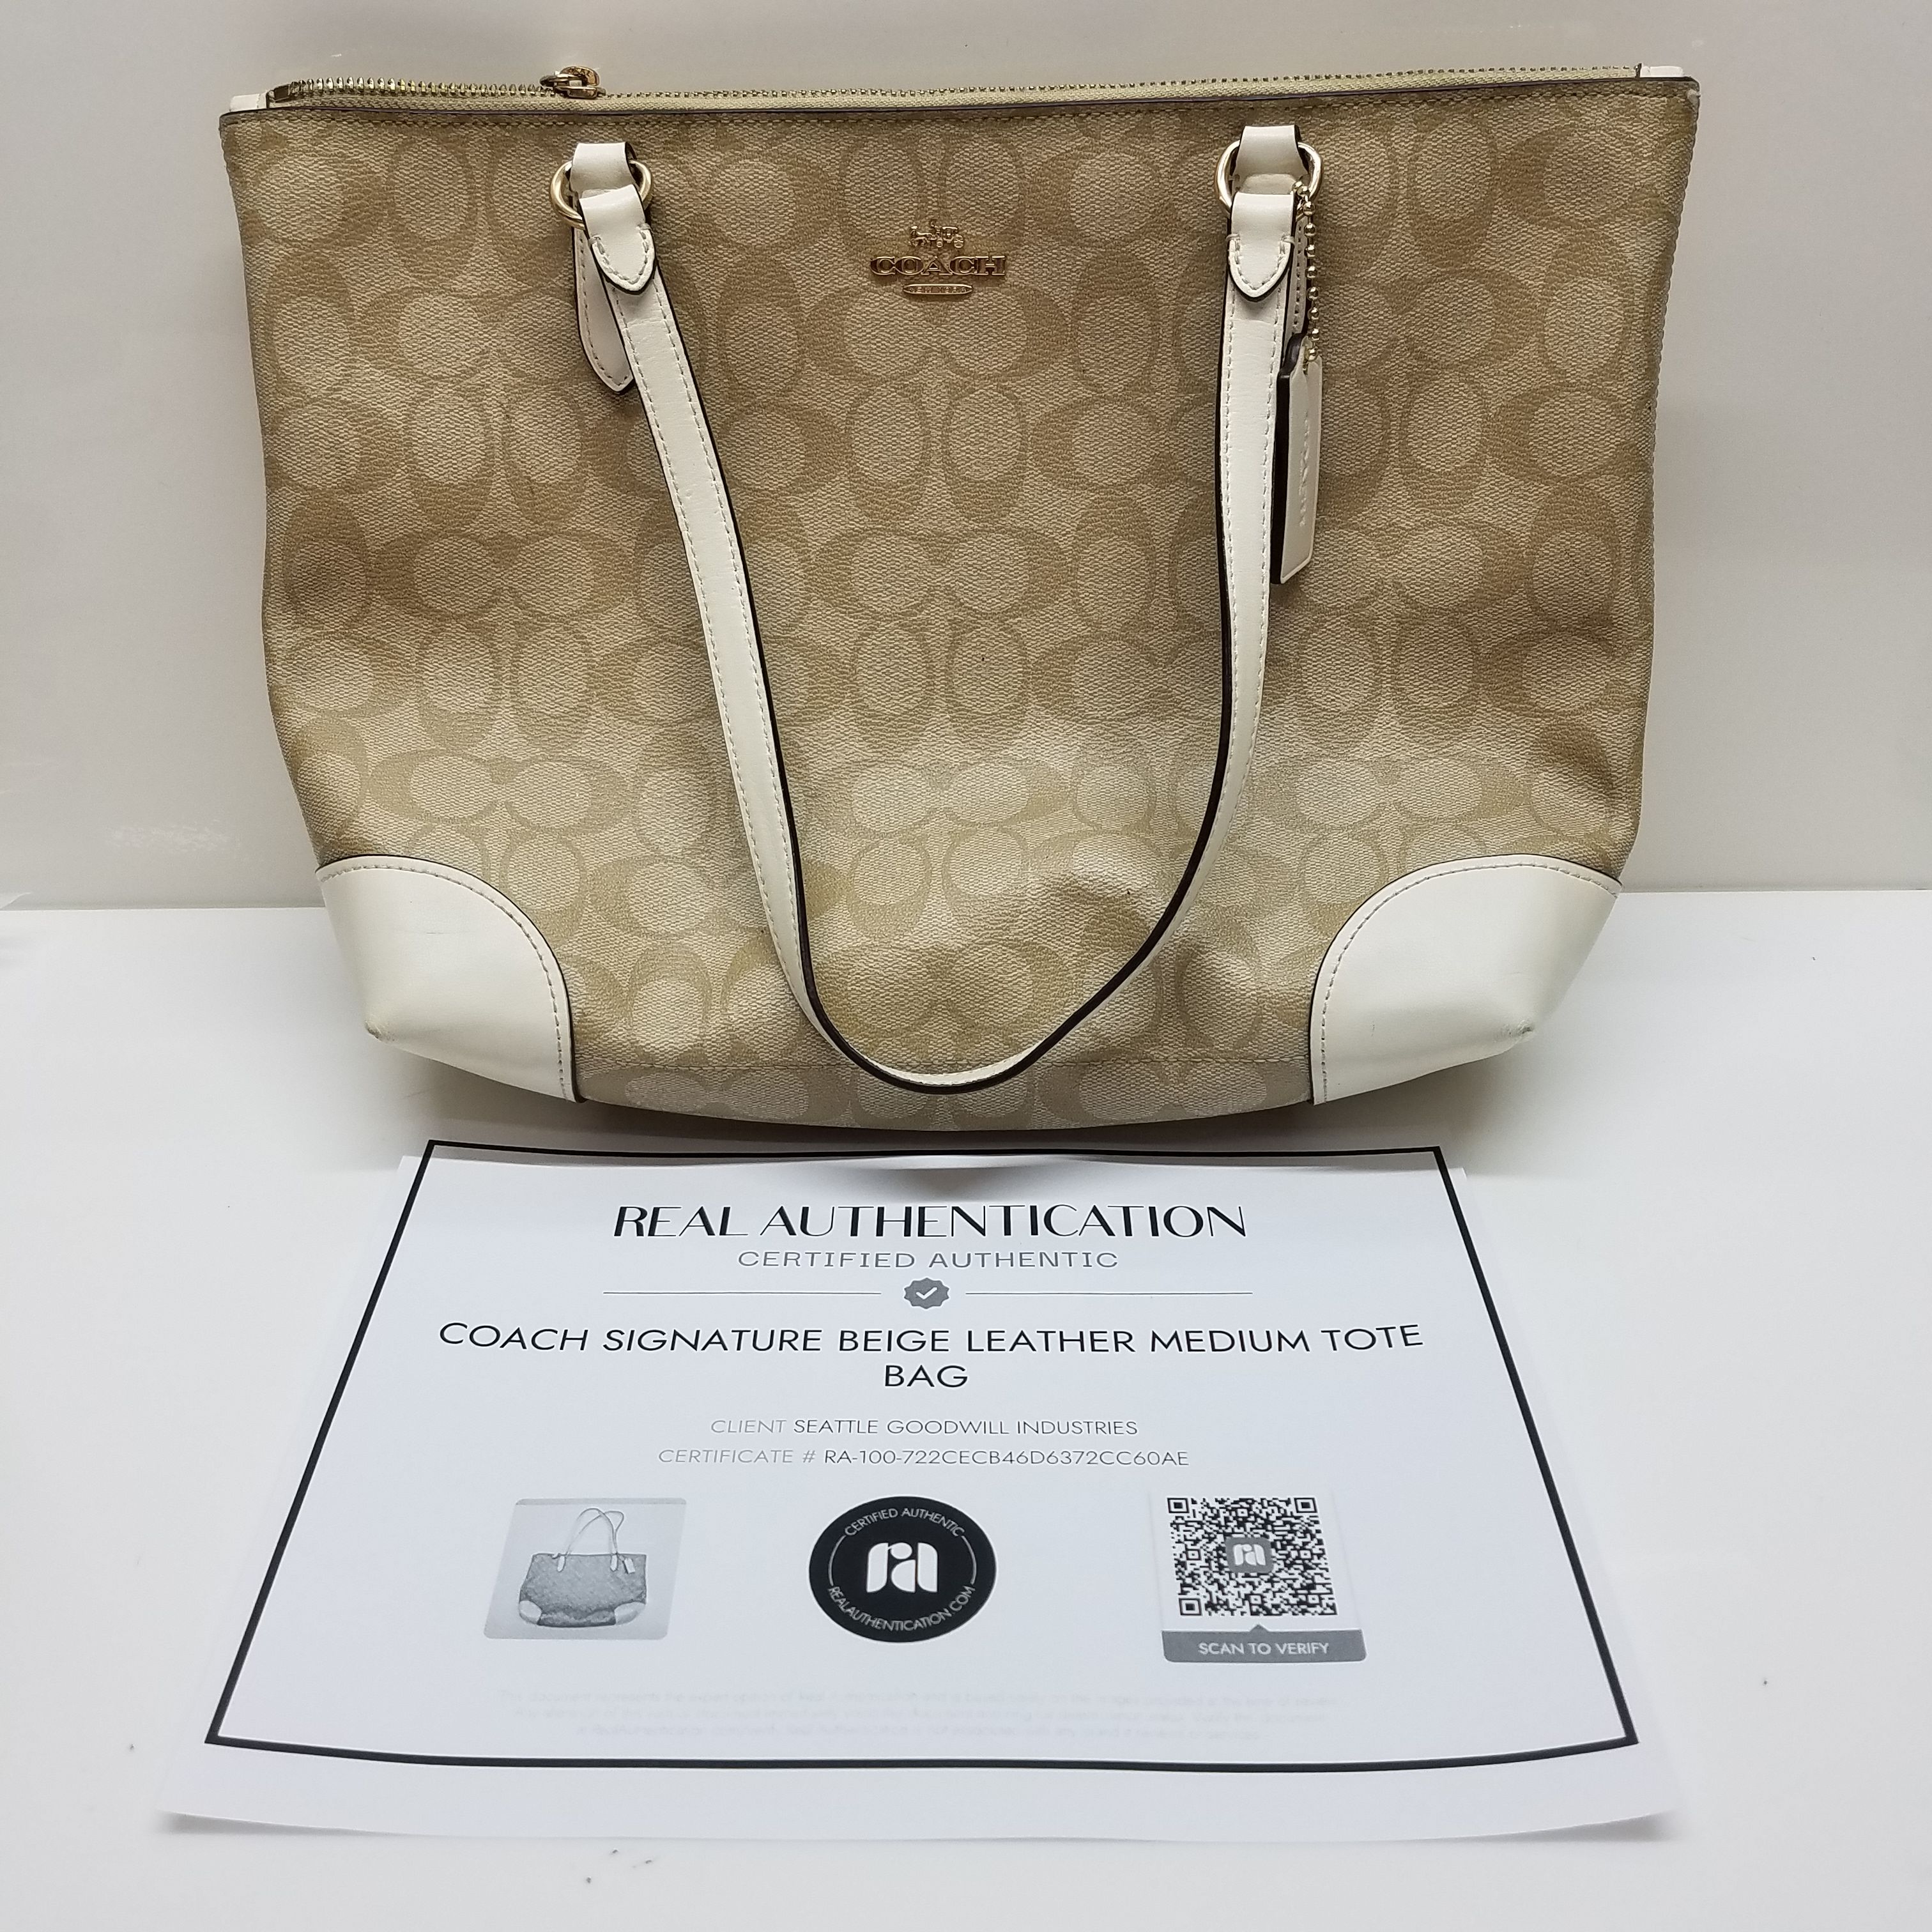 Coach - Authenticated Purse - Beige for Women, Very Good Condition